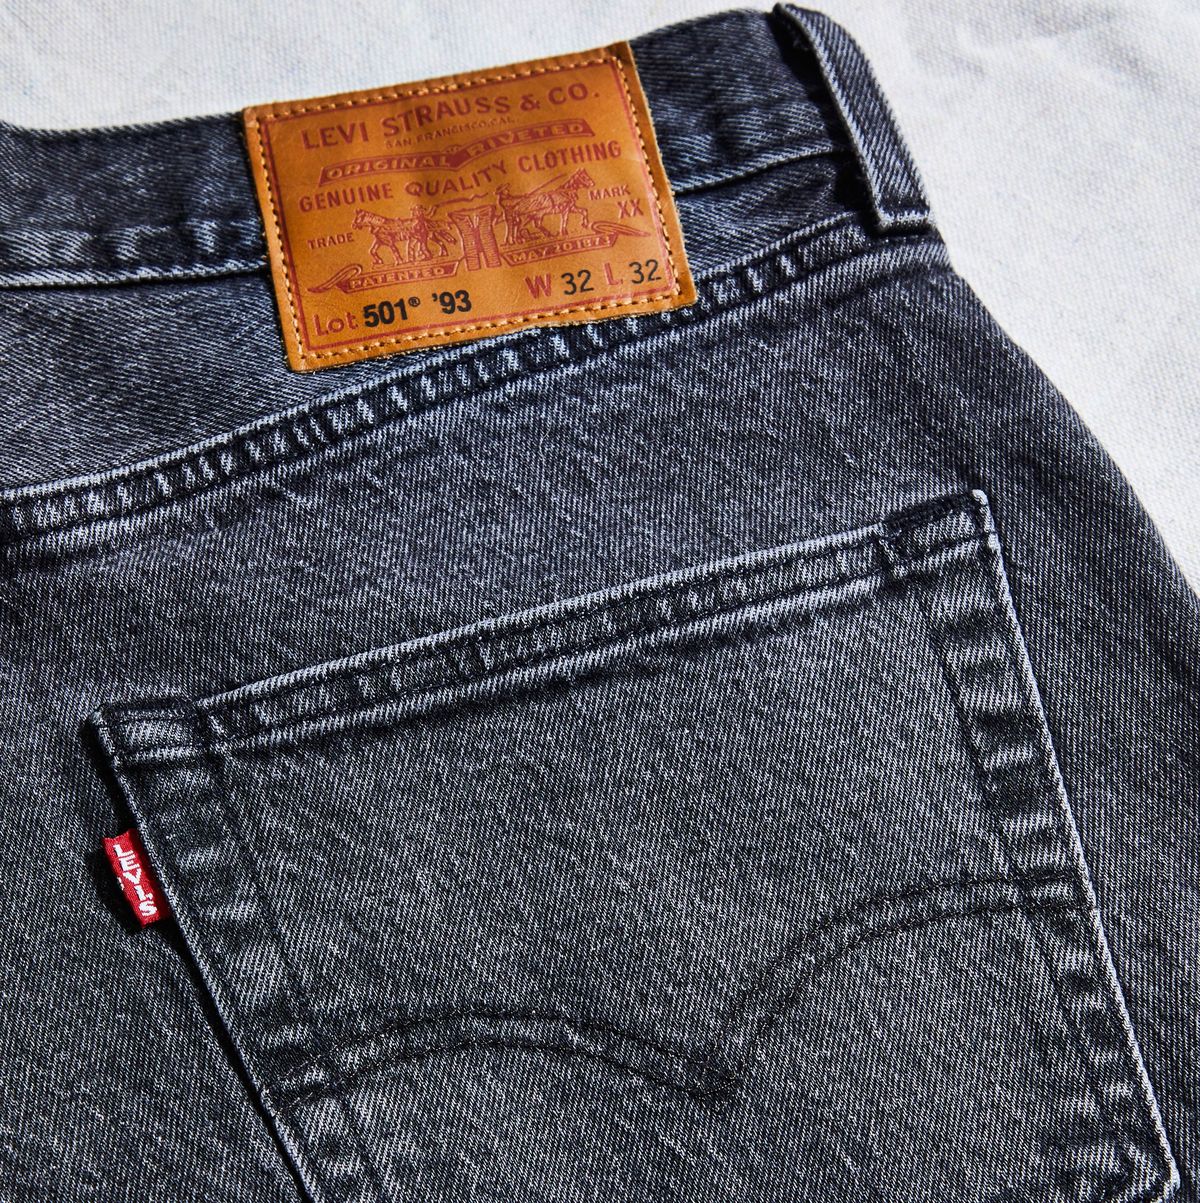 Levi's 501 Jeans Review and Endorsement